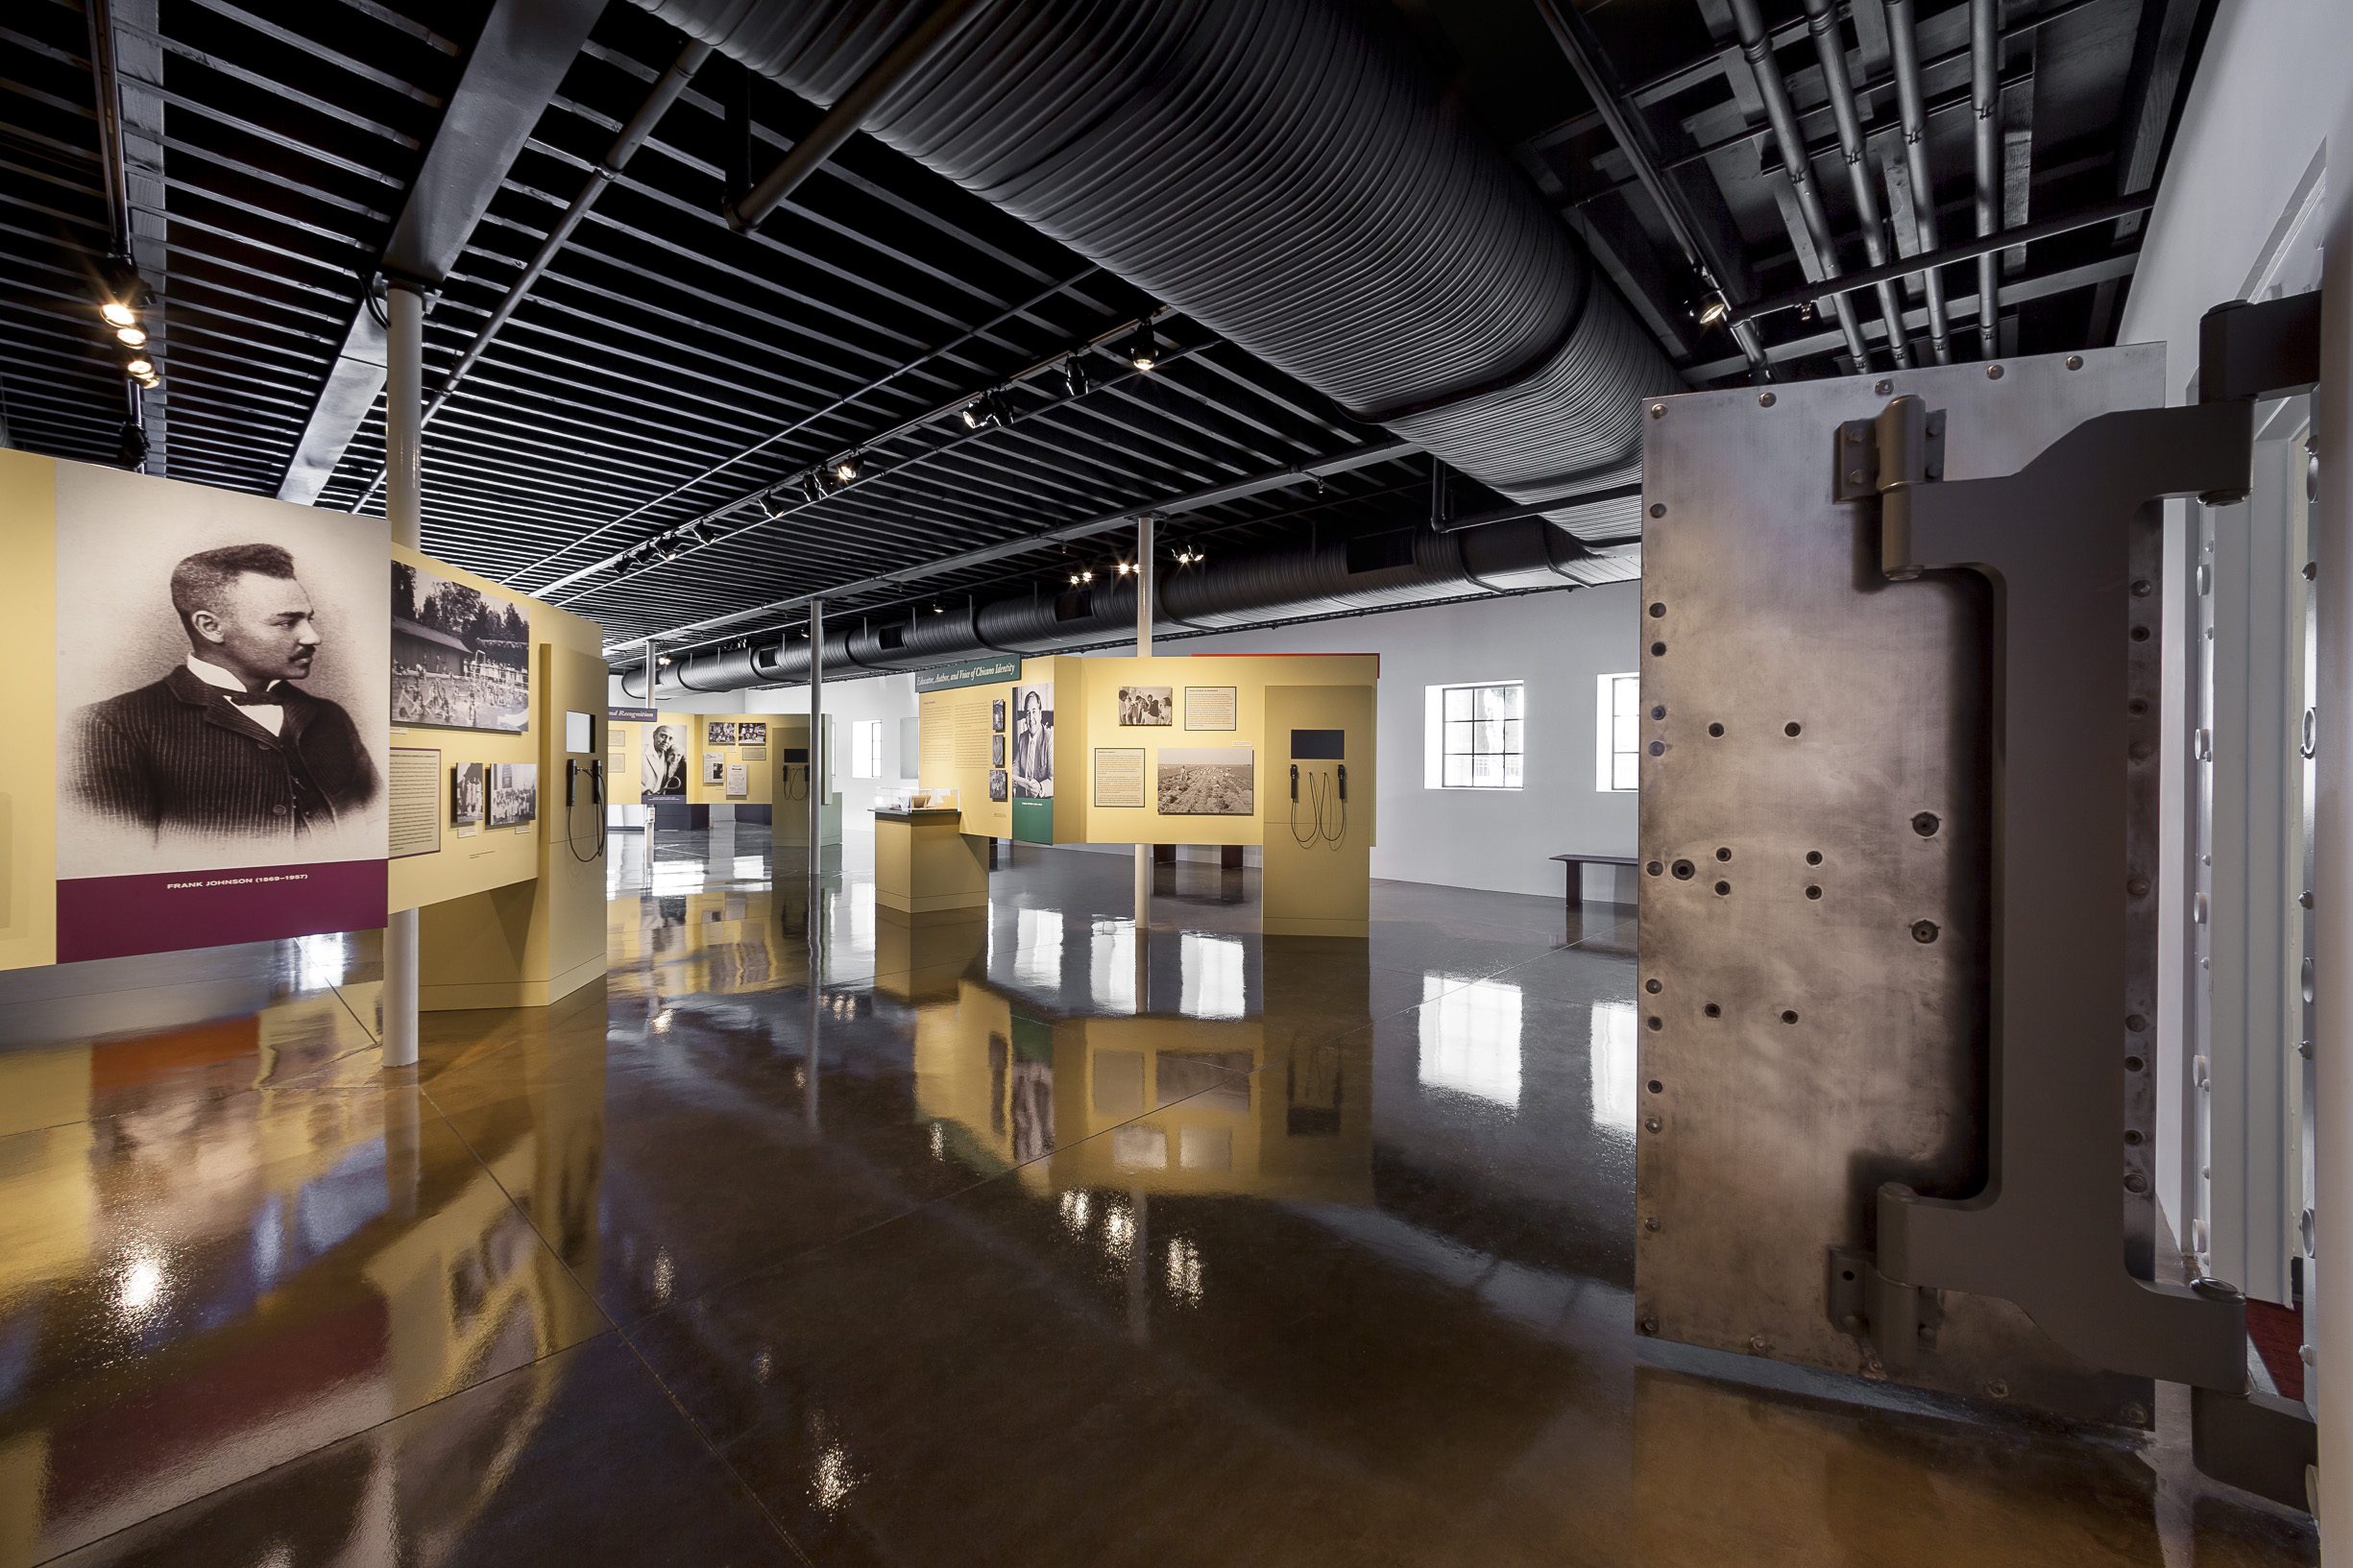 The facility houses the permanent collection of Japanese-American artist Mine Okubo and offers and exhibition gallery and research facility.